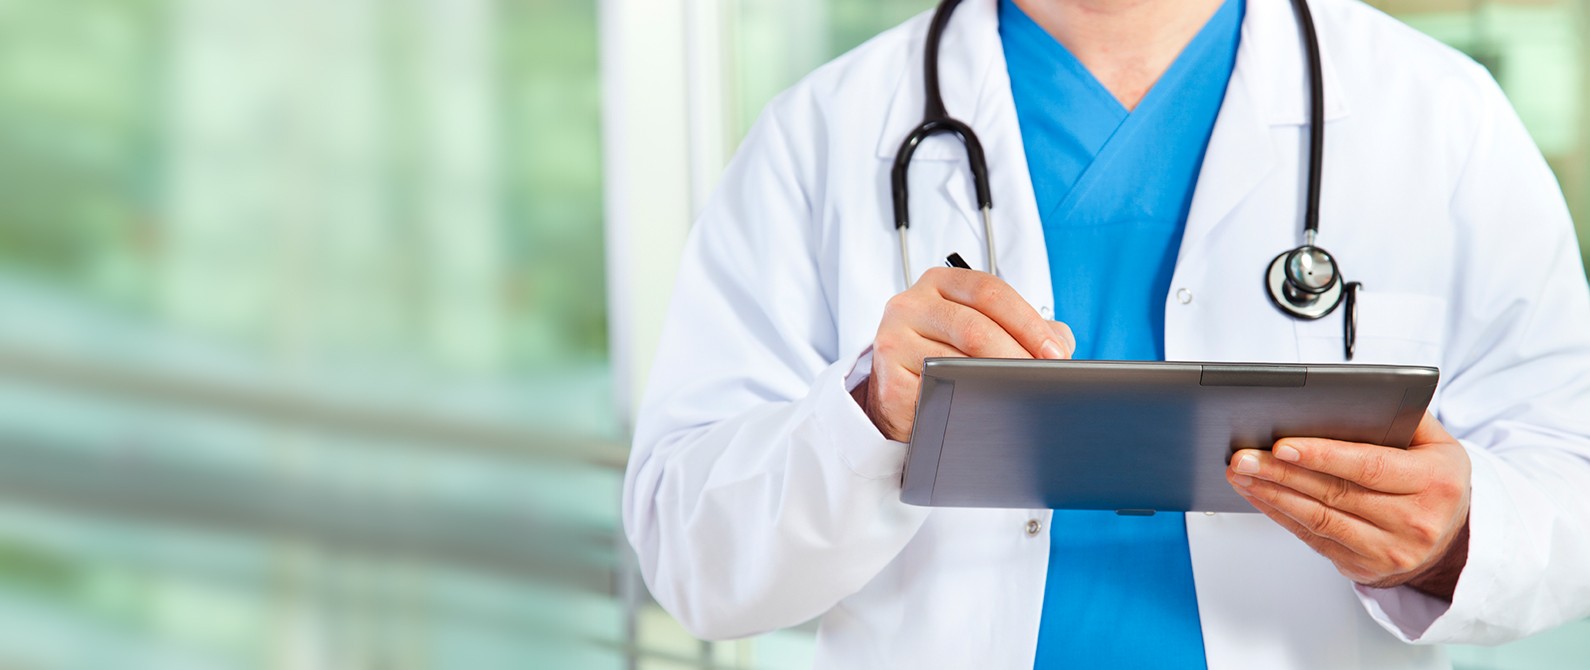 image of doctor holding tablet